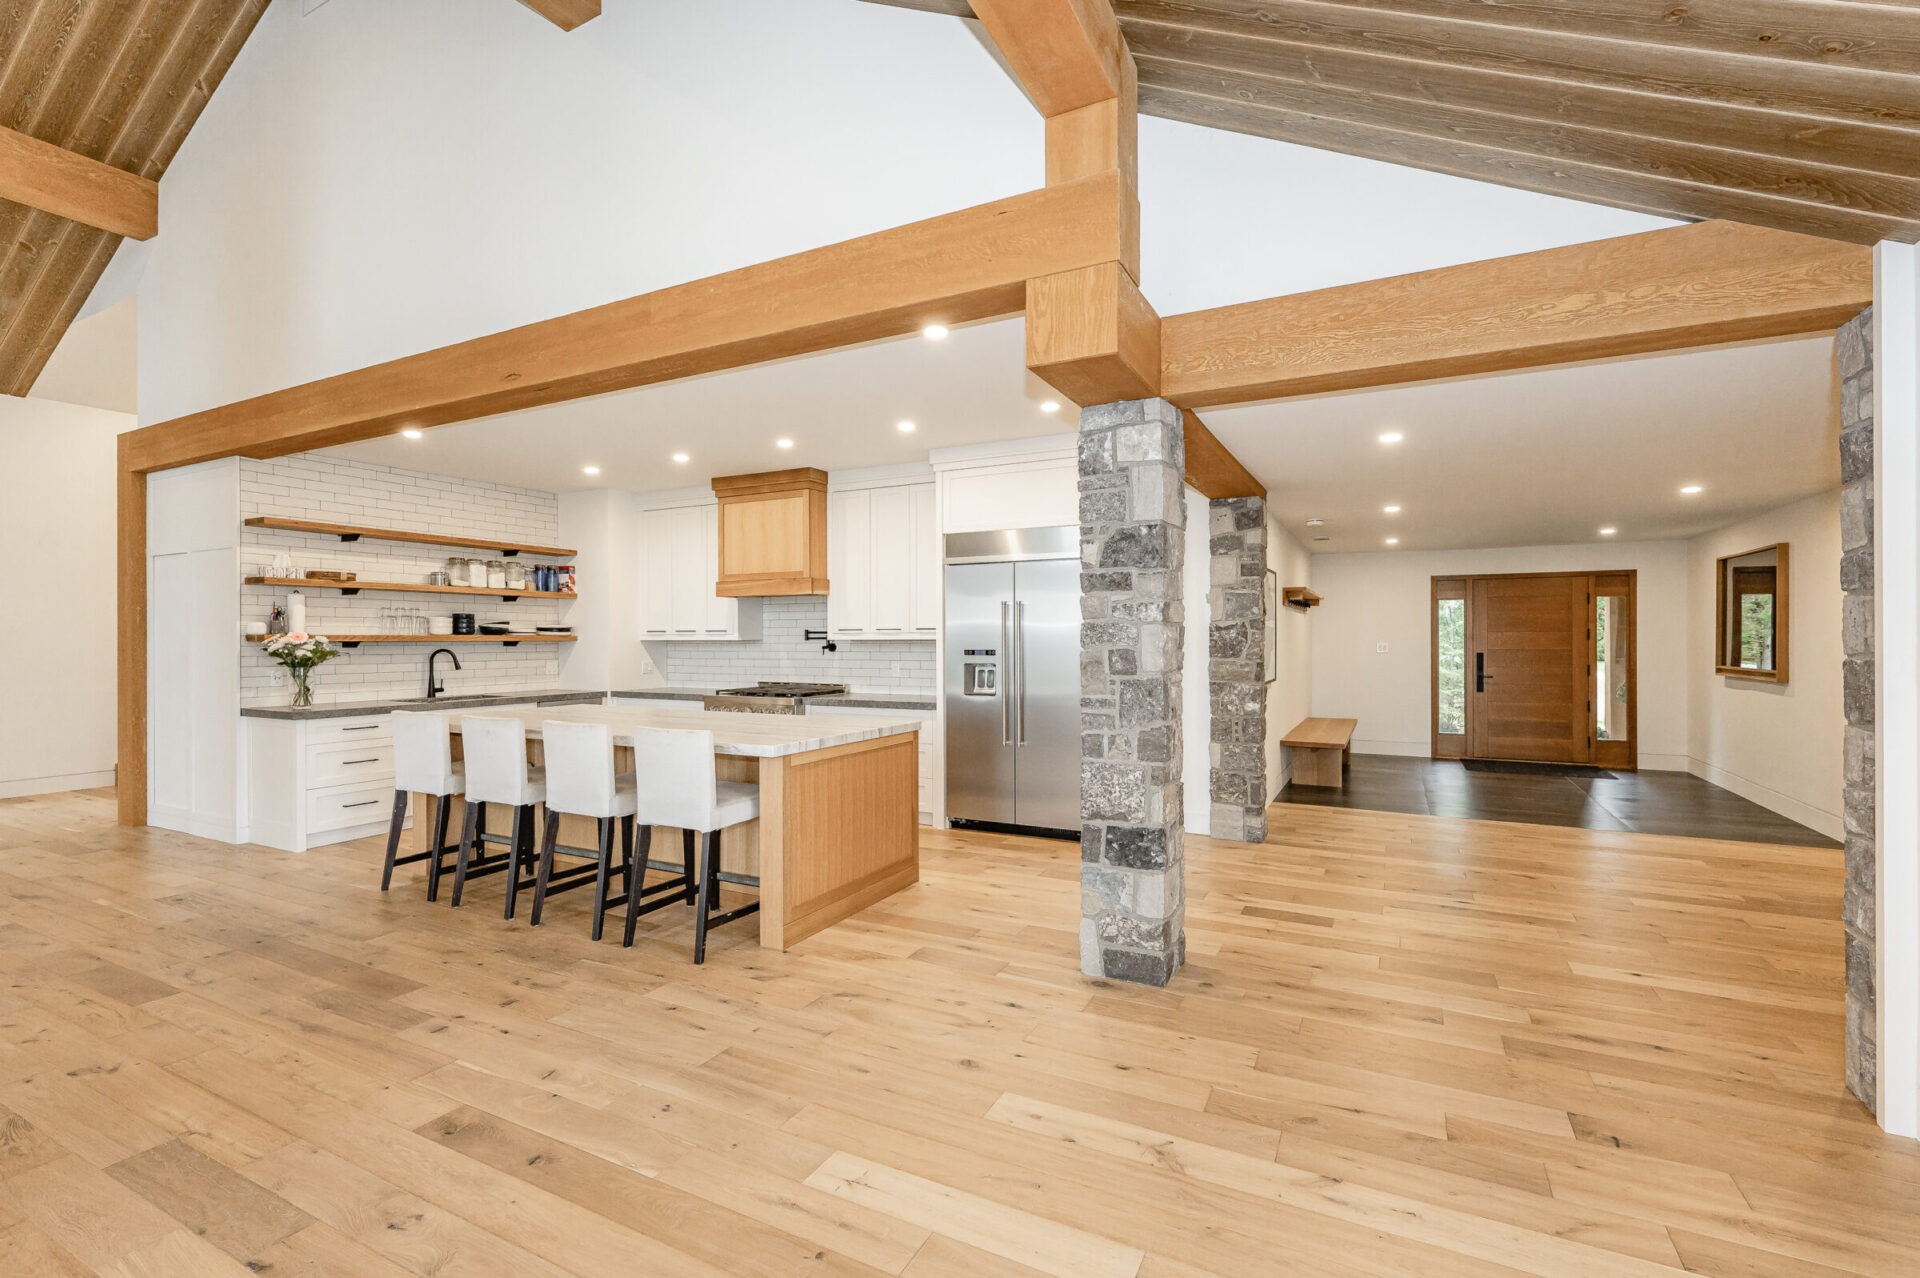 A spacious, modern kitchen with white countertops, wooden beams, stone pillars, bar stools, and stainless steel appliances. Hardwood flooring throughout with ample light.